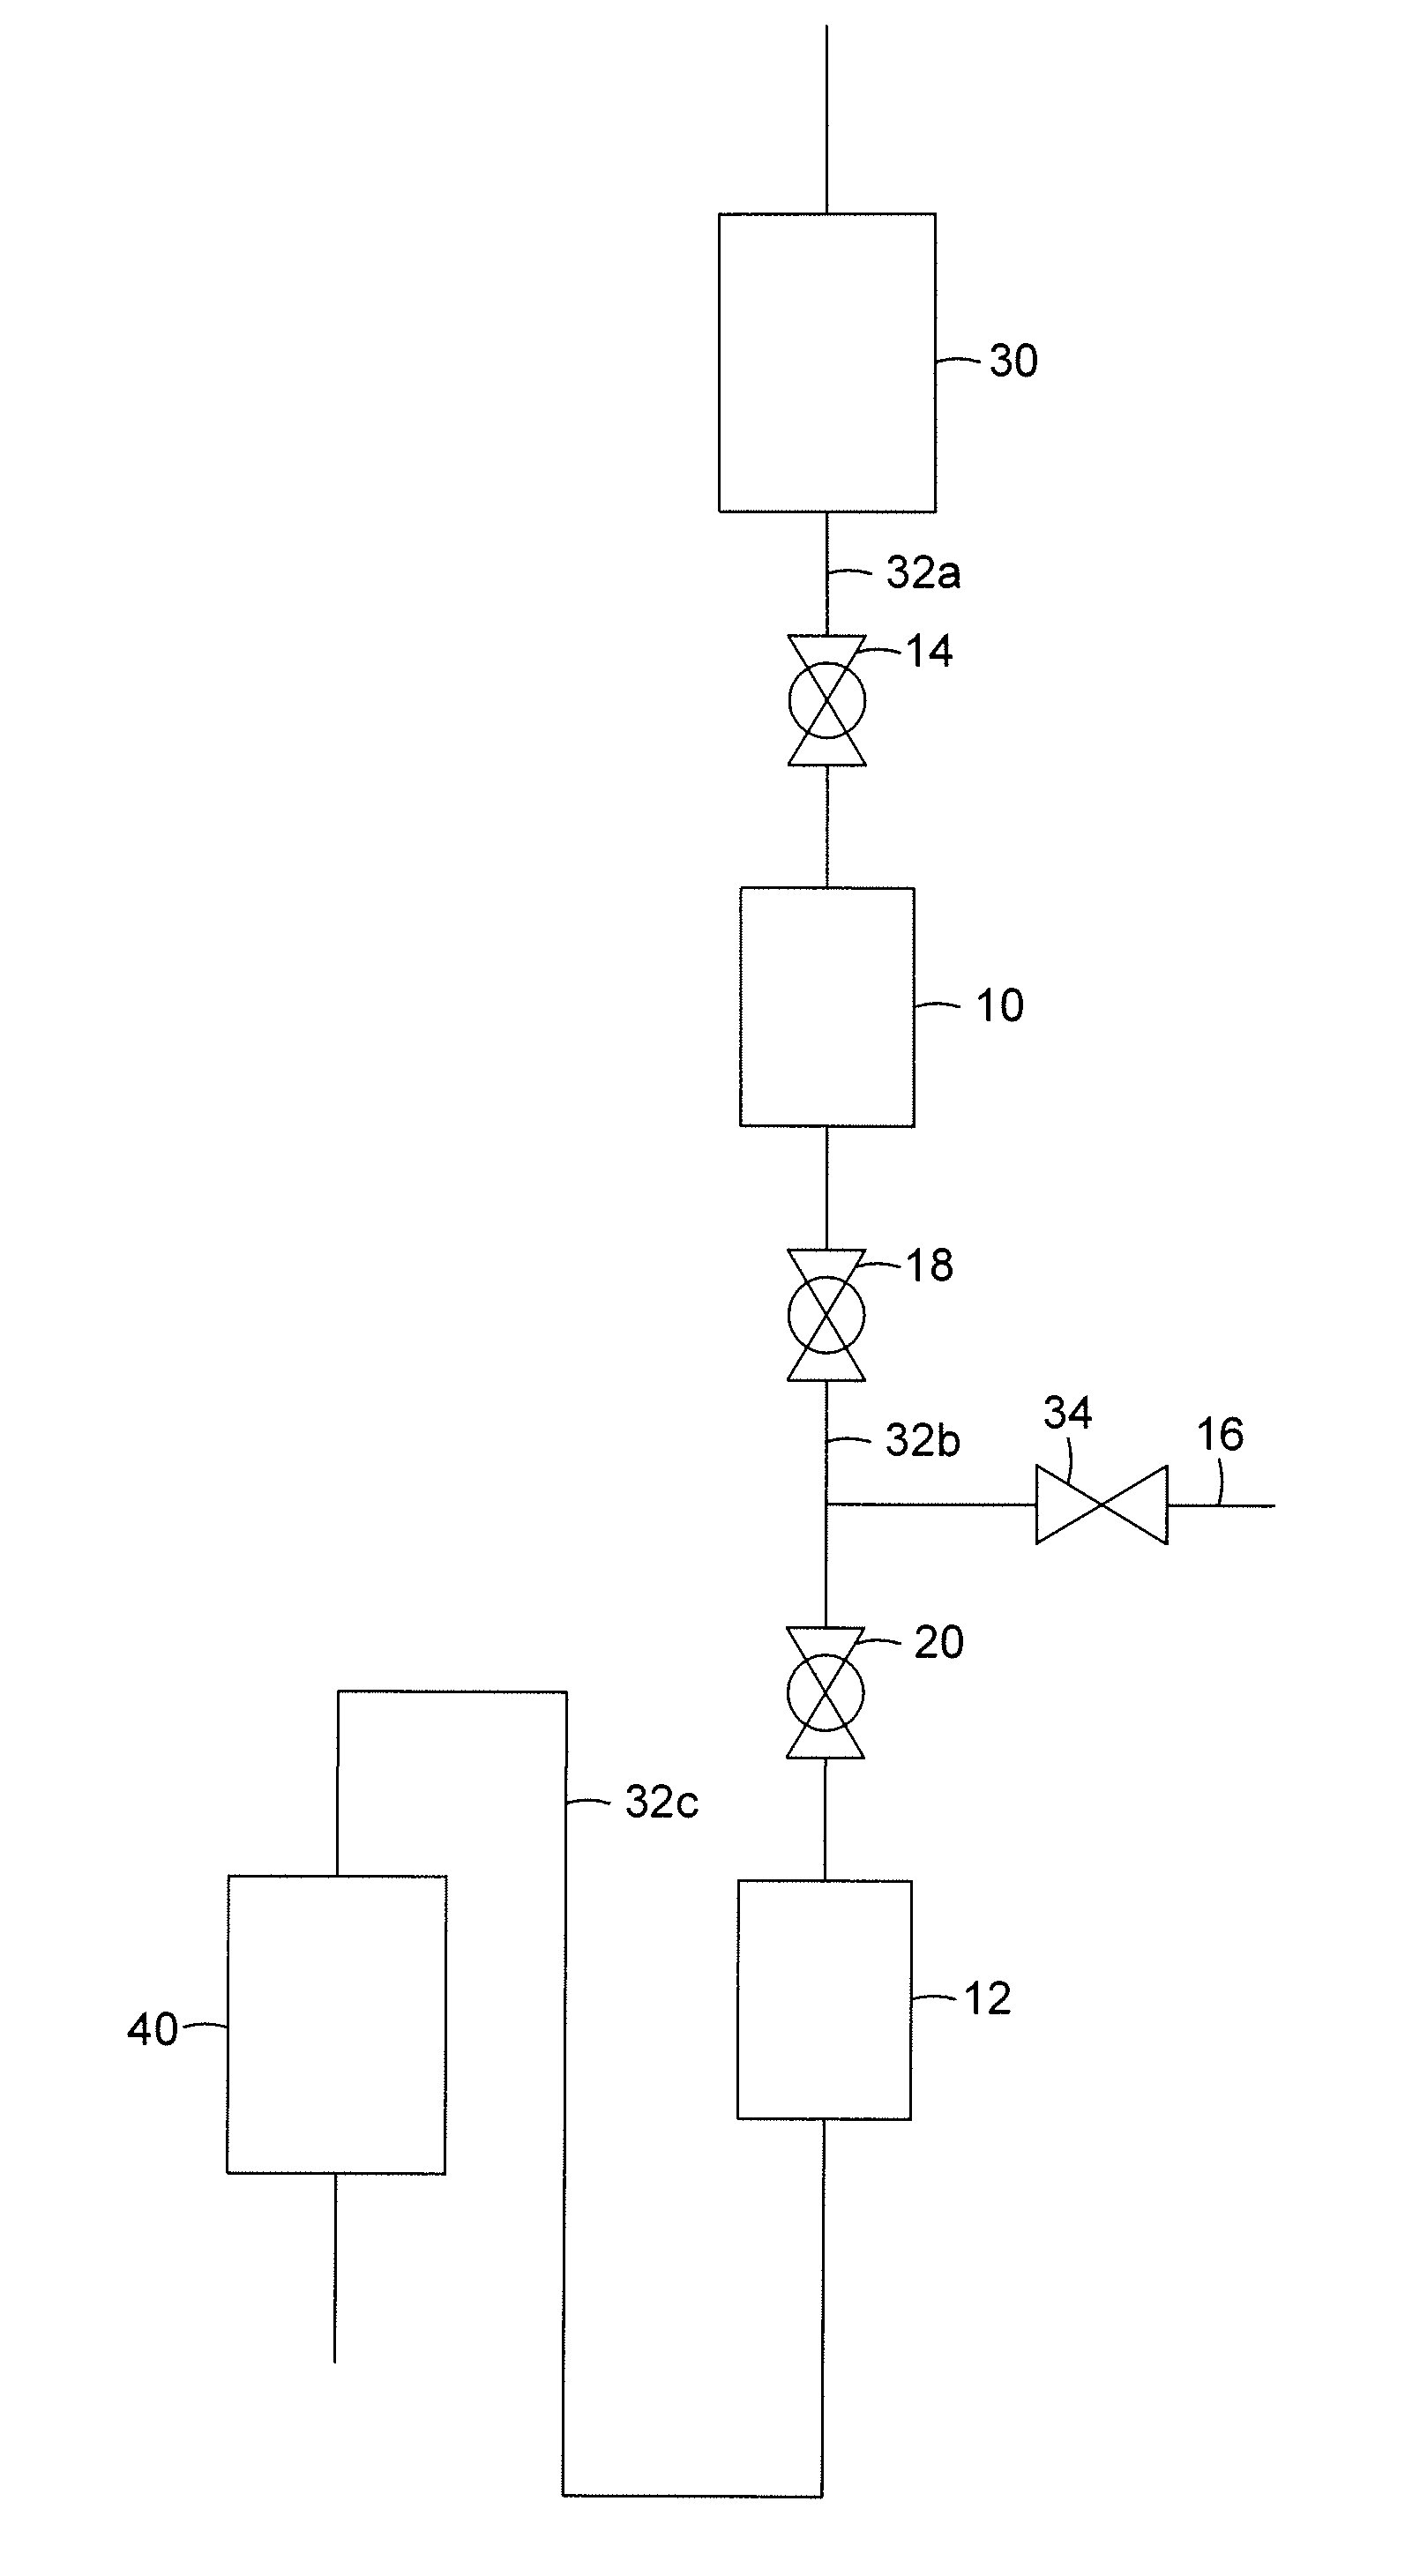 Device to Transfer Catalyst from a Low Pressure Vessel to a High Pressure Vessel and Purge the Transferred Catalyst